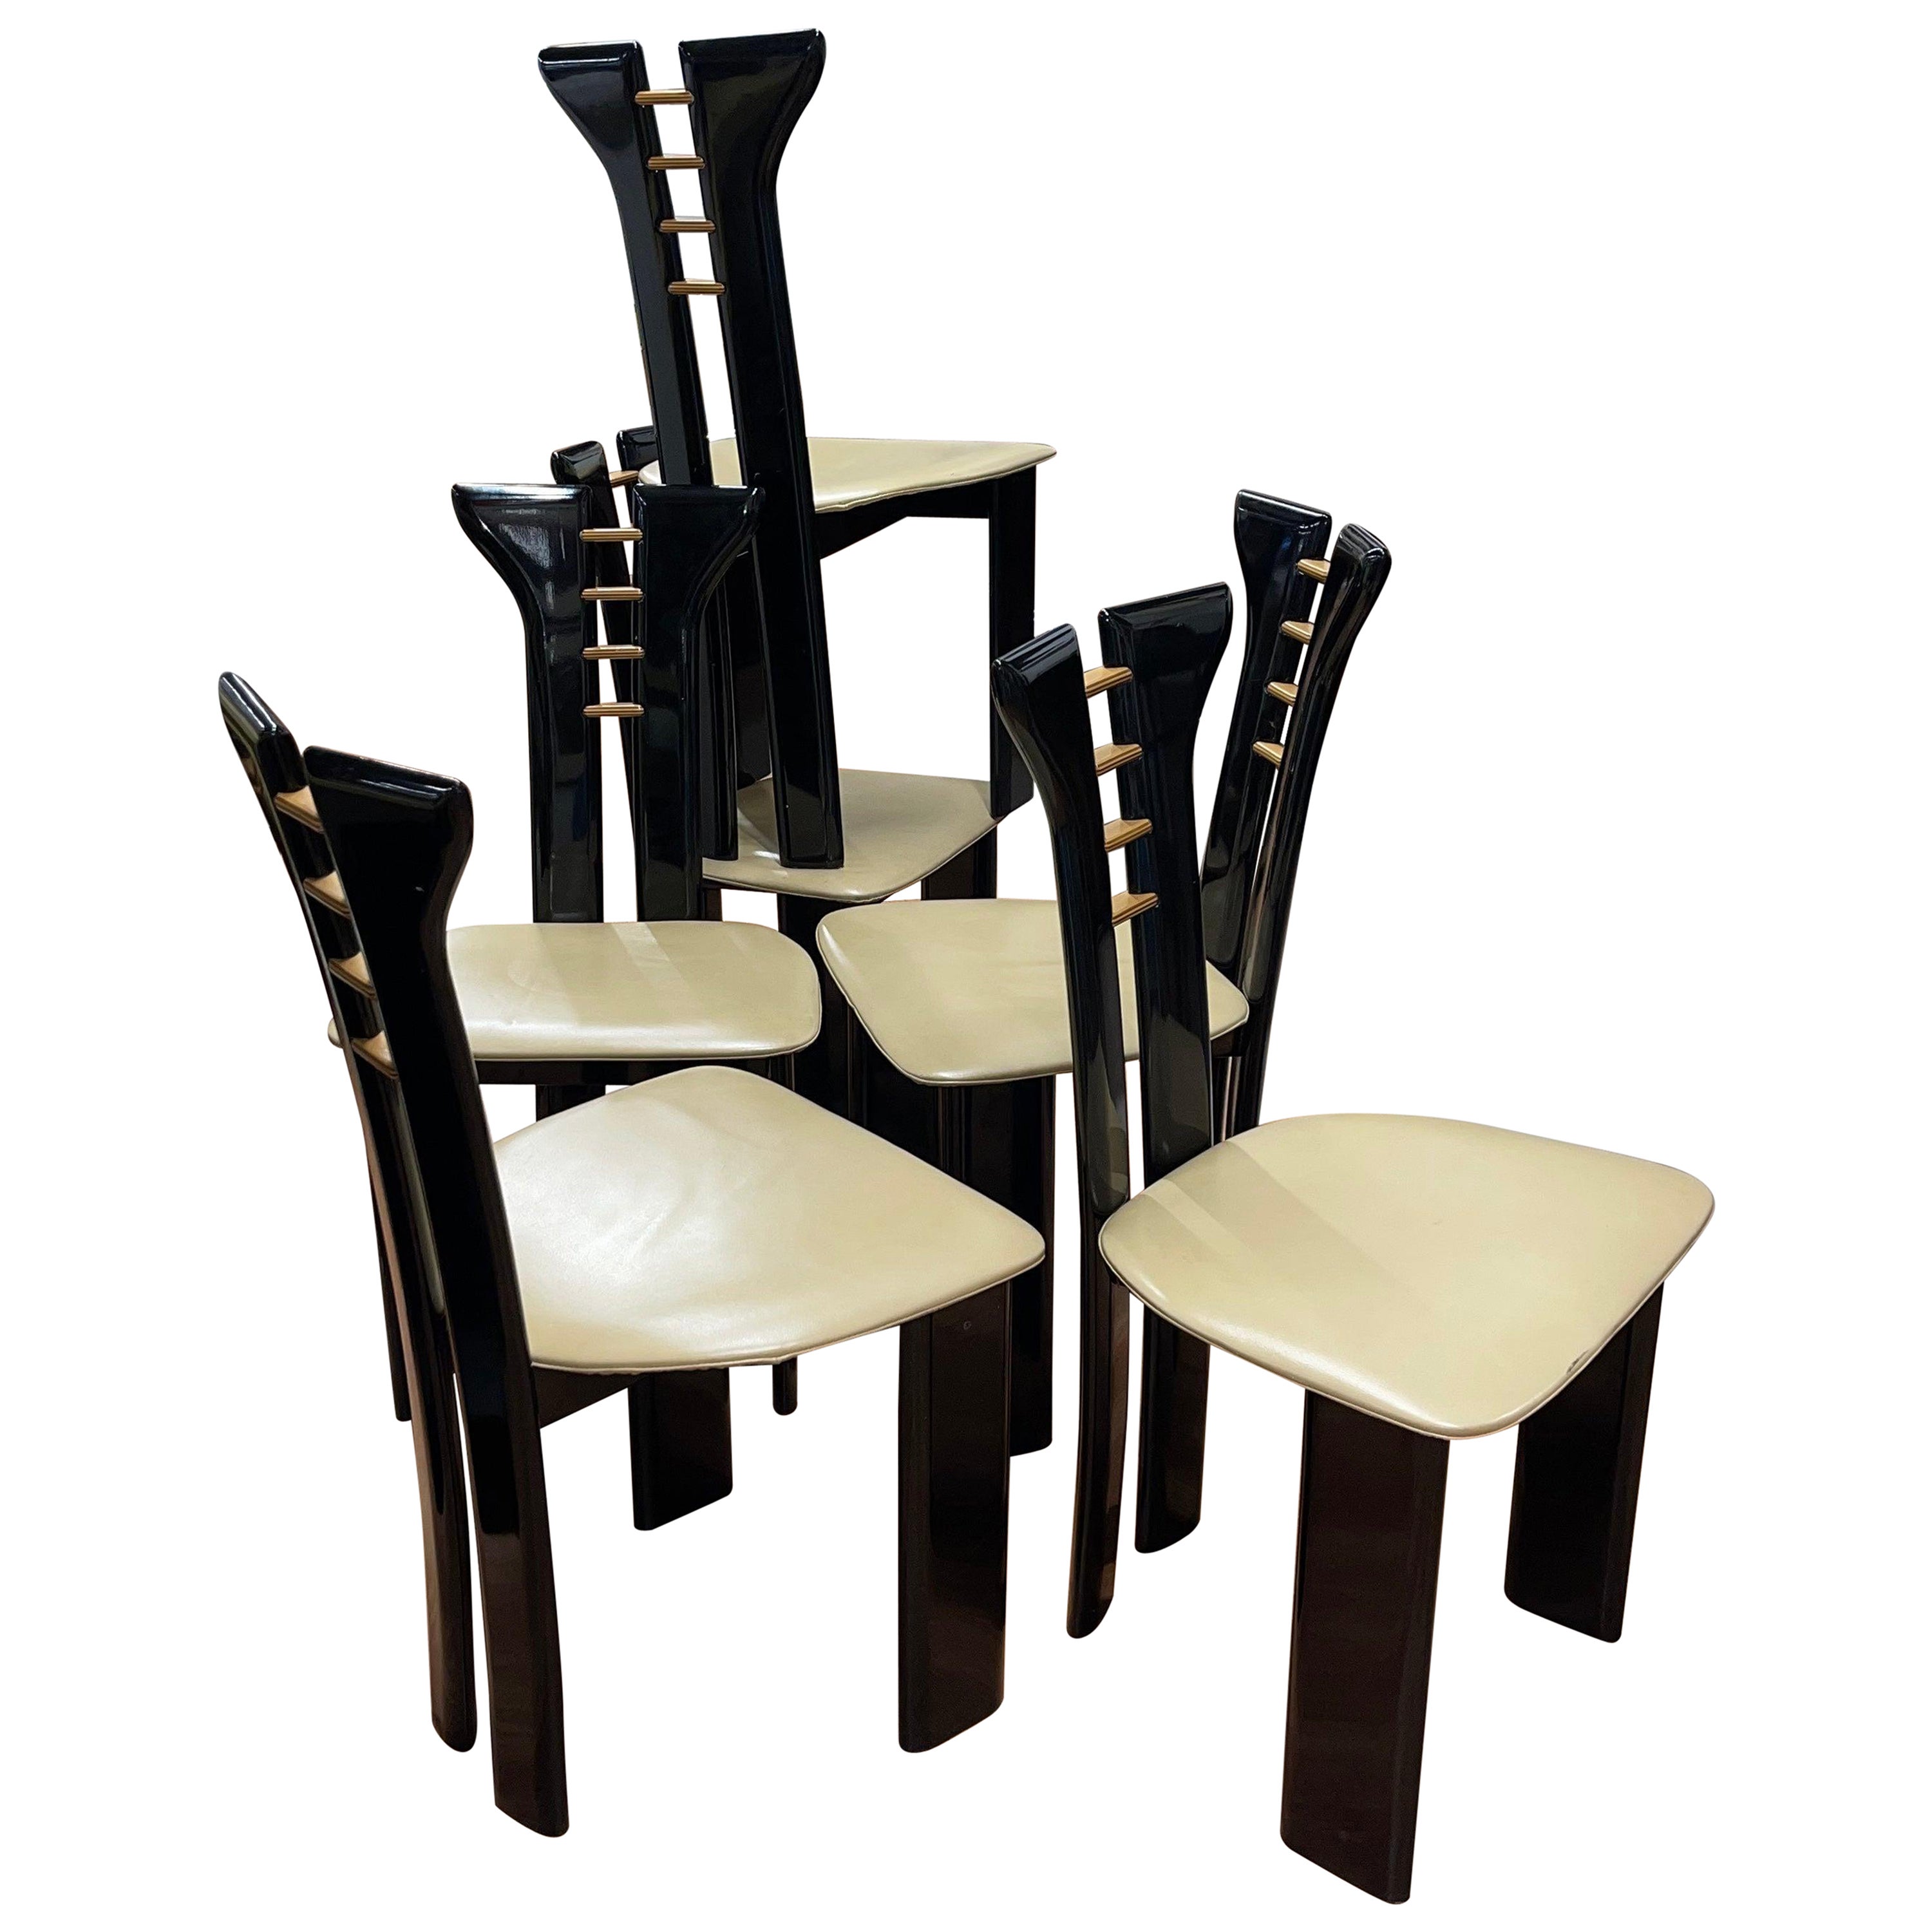 Pierre Cardin for Roche Bobois Dining Chairs For Sale at 1stDibs